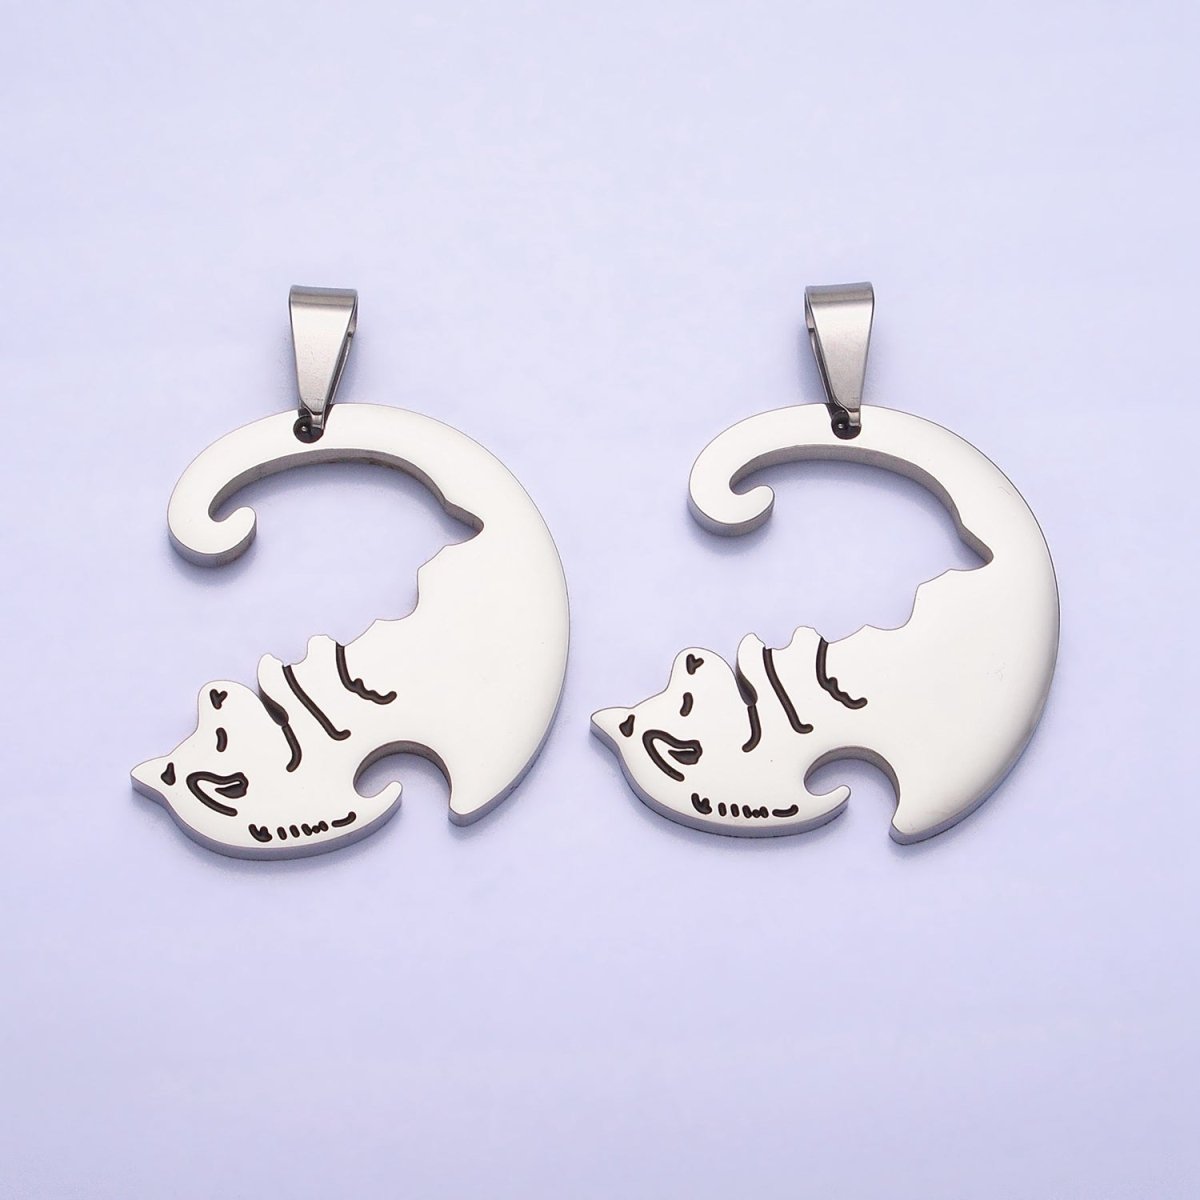 Stainless Steel Sleeping Dog Puppy Couple's Friendship Pendant Set in Gold & Silver | P-1123 - DLUXCA